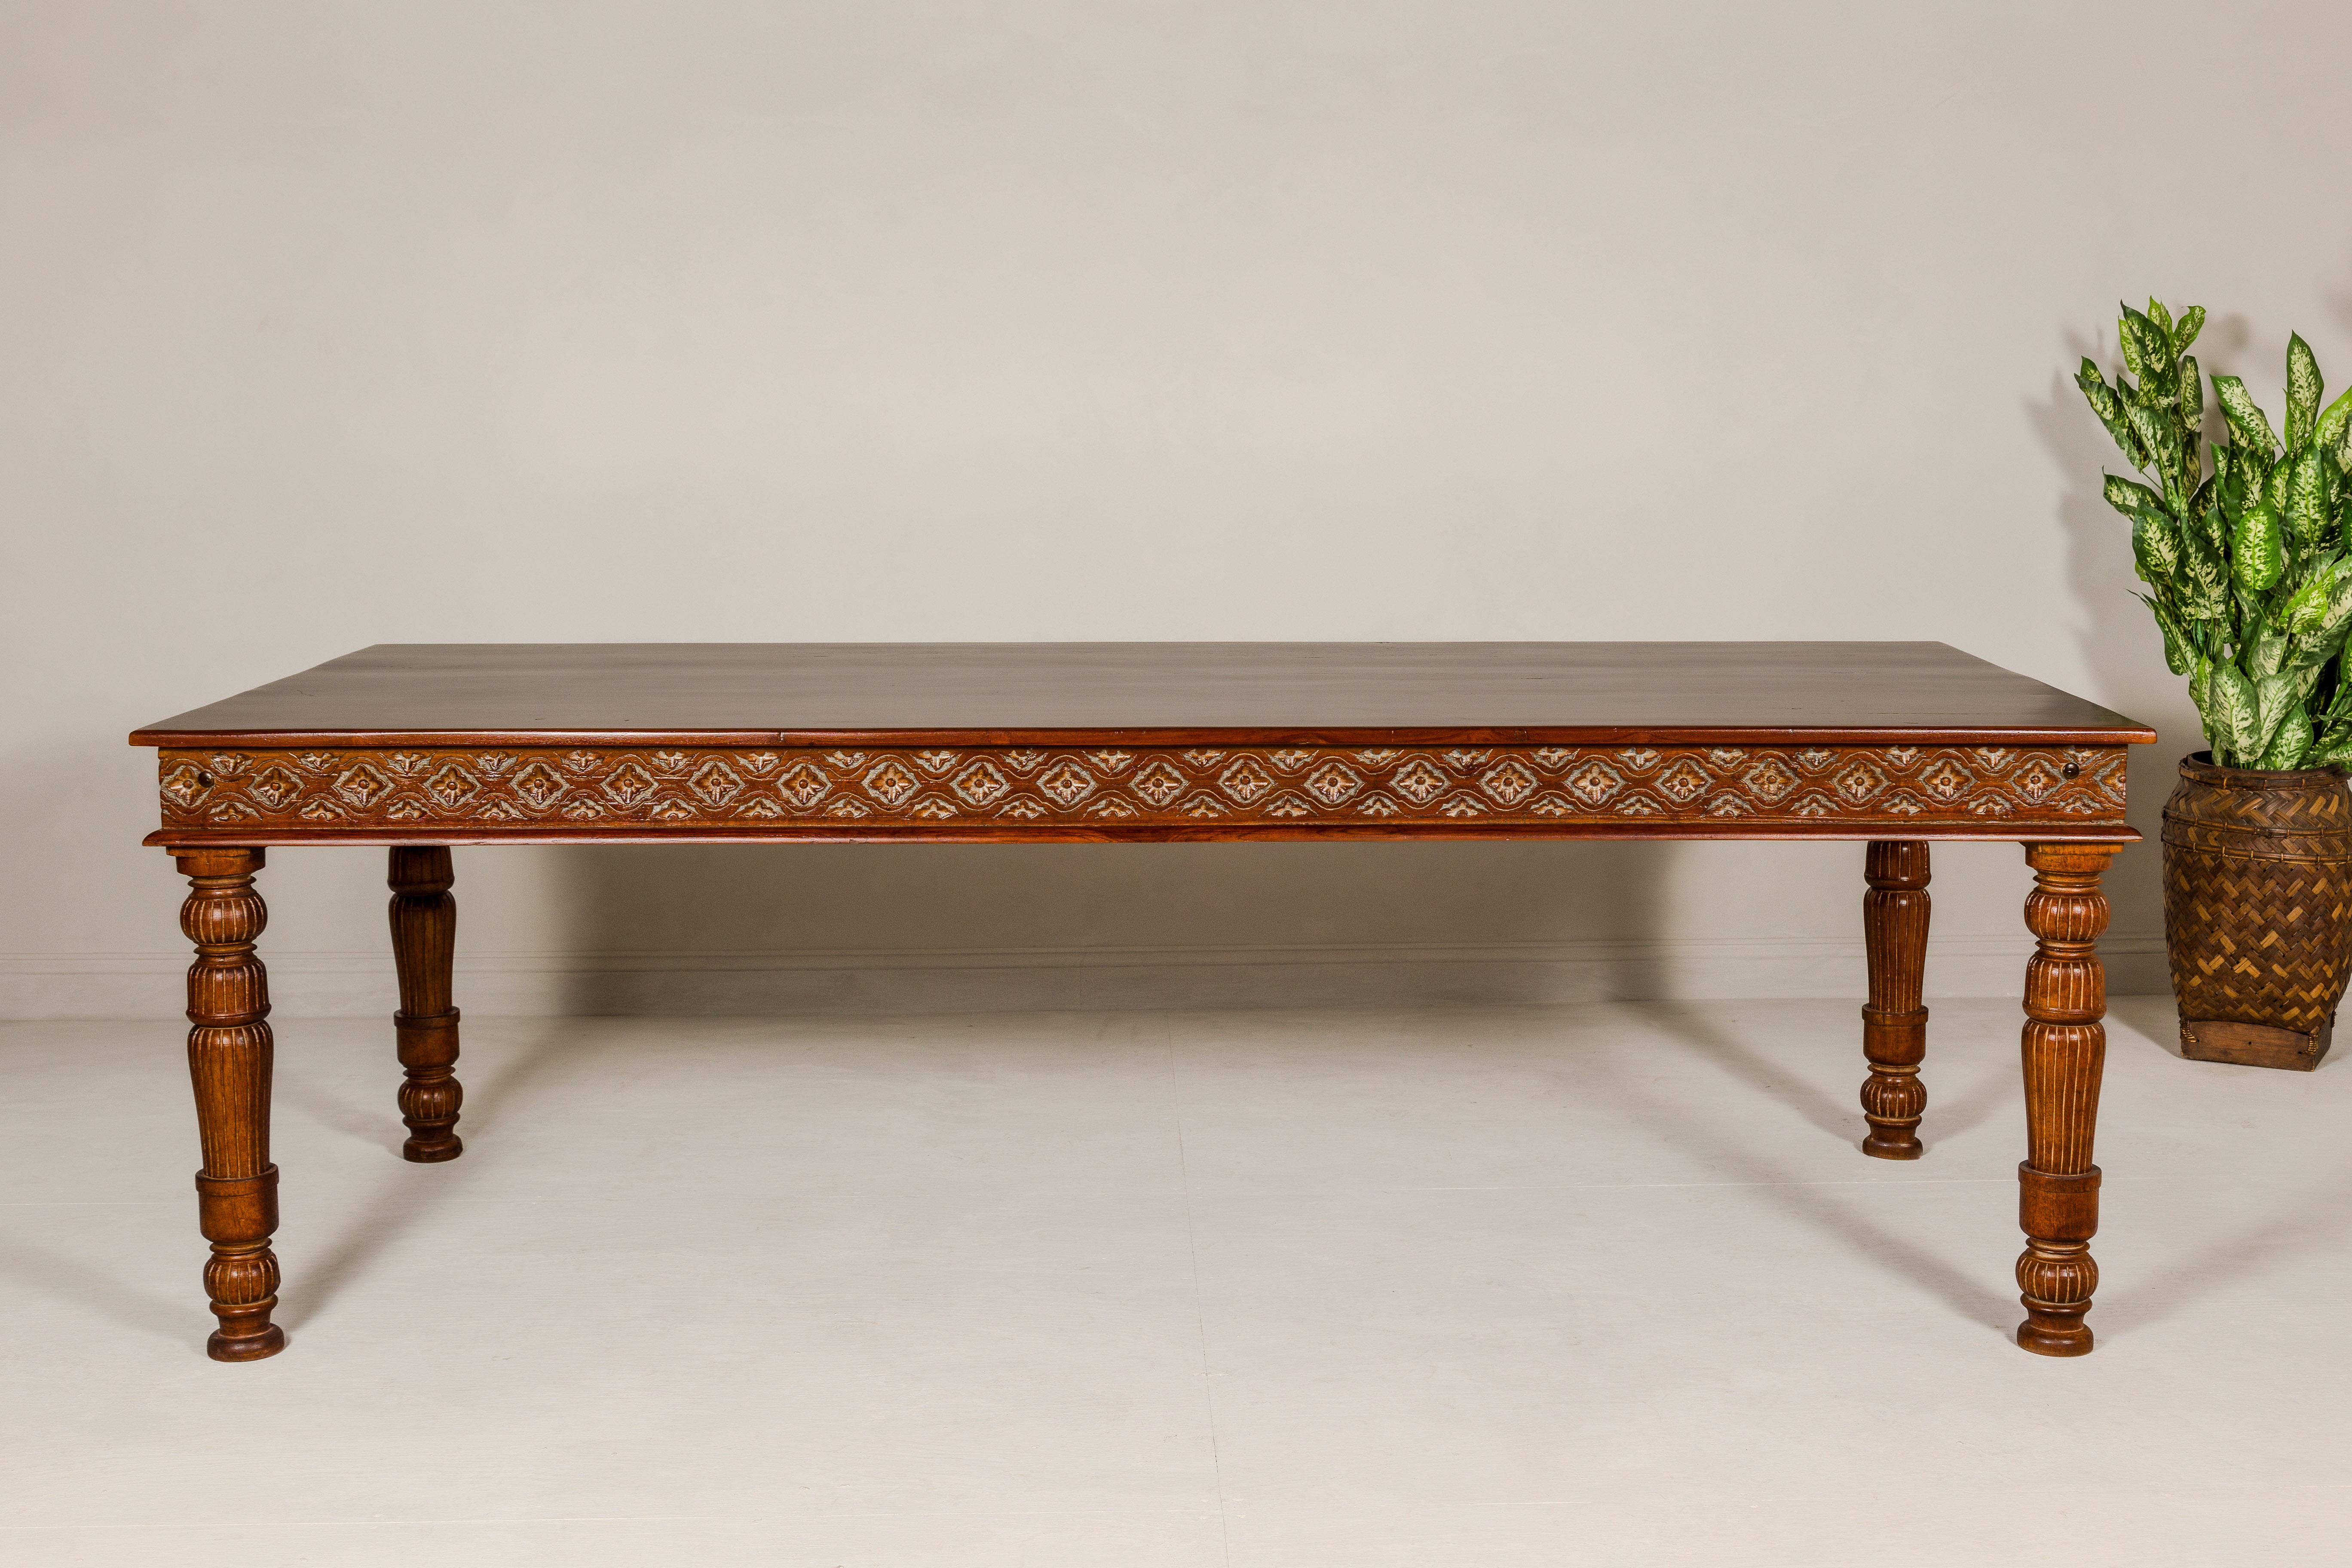 Indian Large Dining Room Table with Carved Apron, Floral Motifs and Turned Legs For Sale